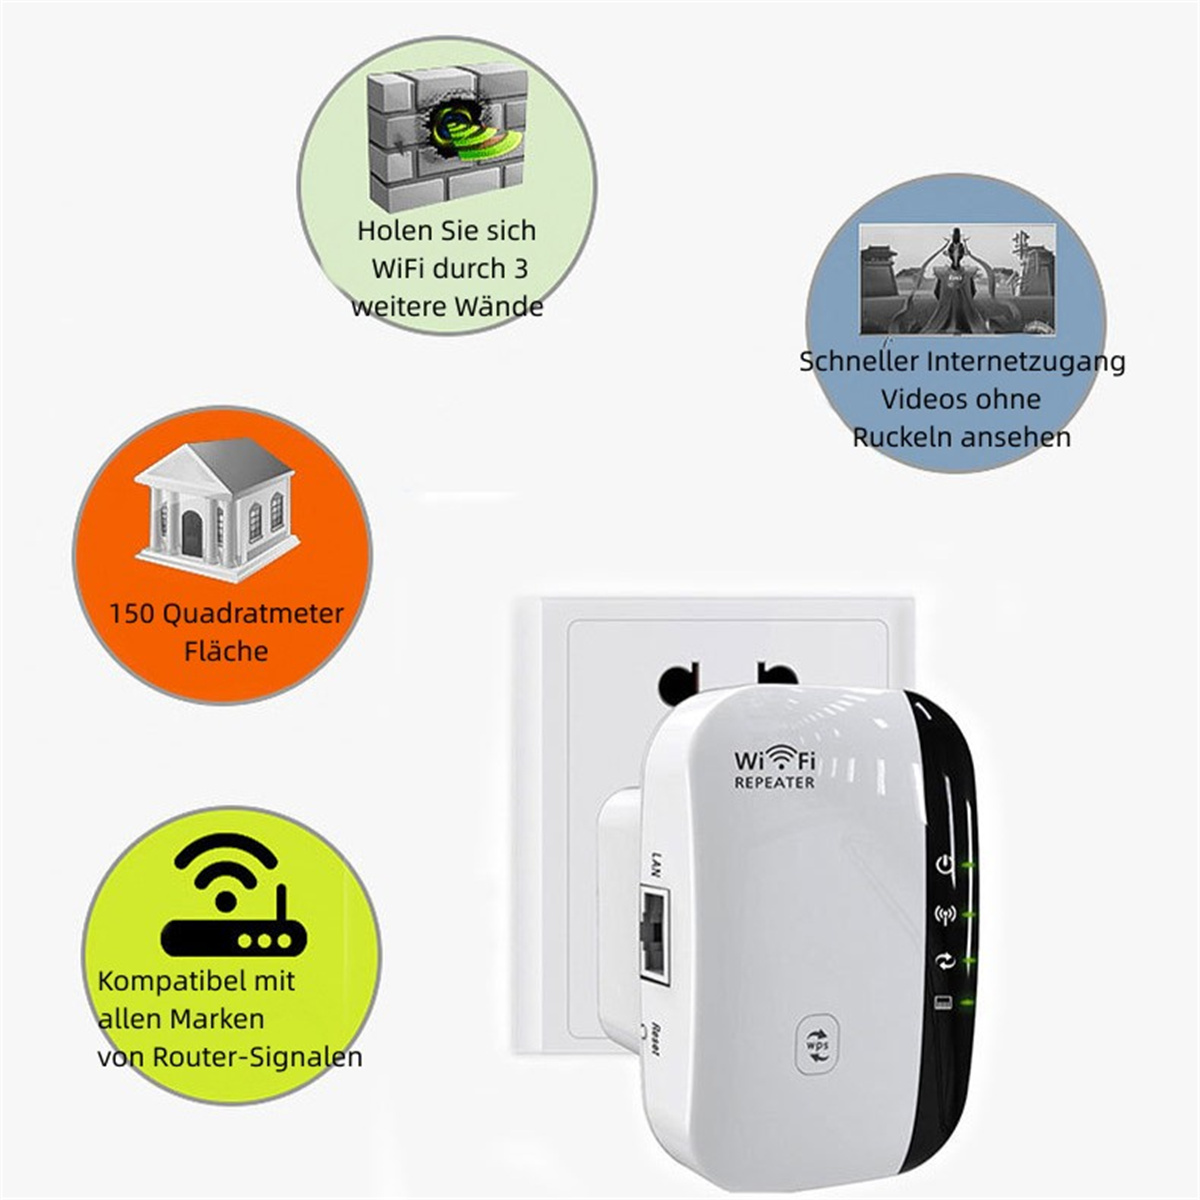 Signal Bun Wall Amplifier King WiFi SHAOKE Expander Repeater Wireless White Small Through Network Router